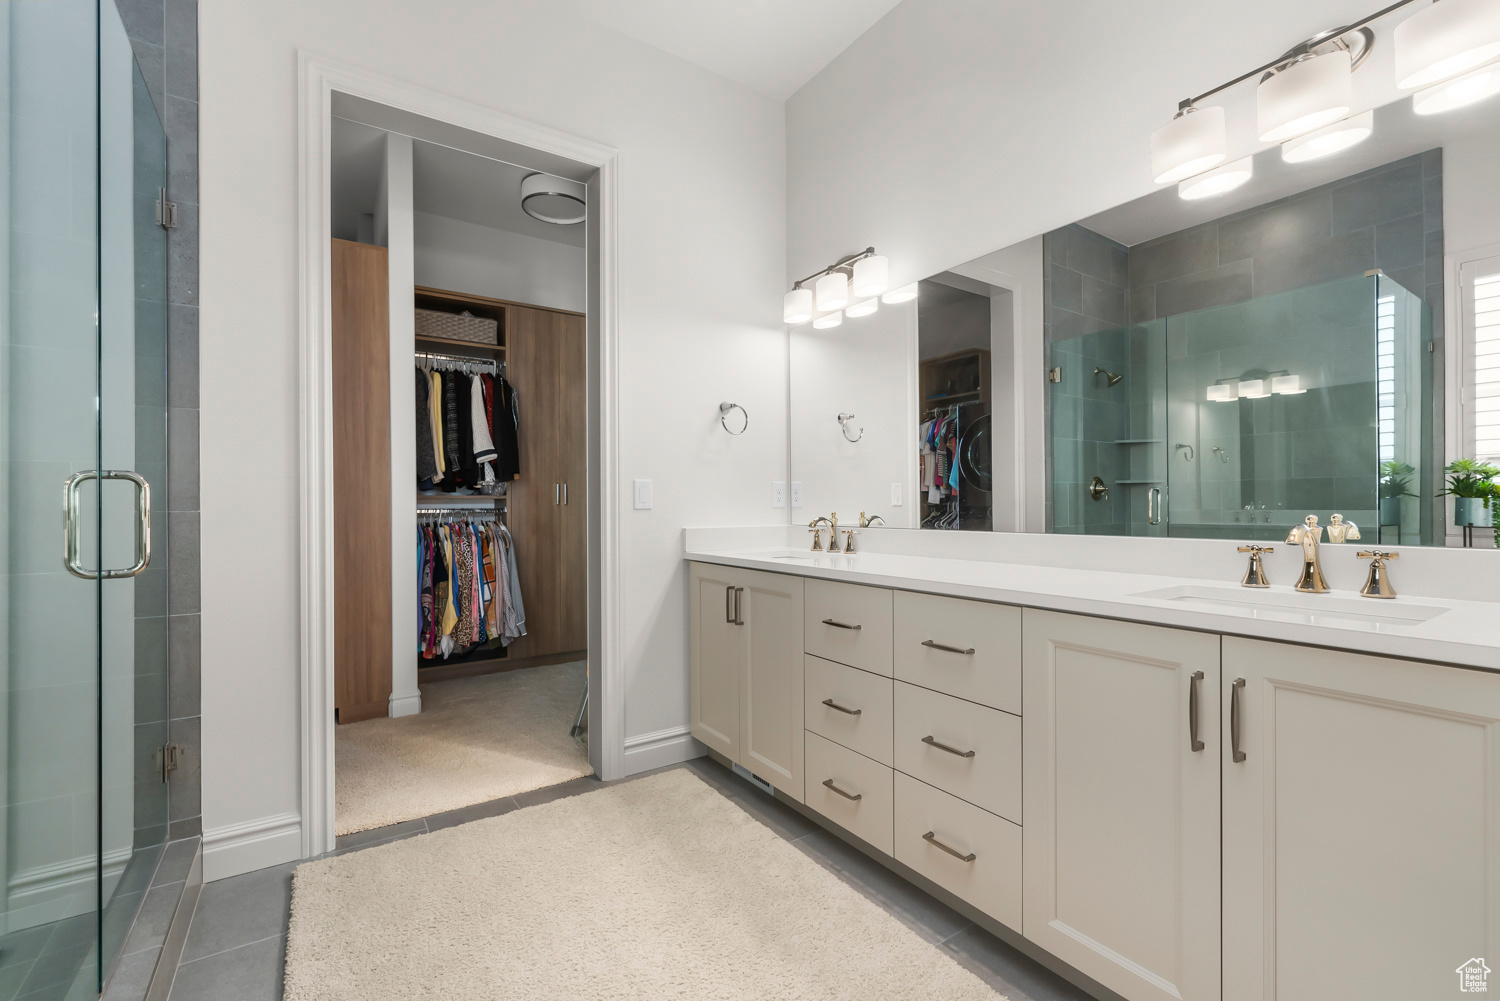 Owner's private bathroom with hardwood / wood-style floors and double vanity